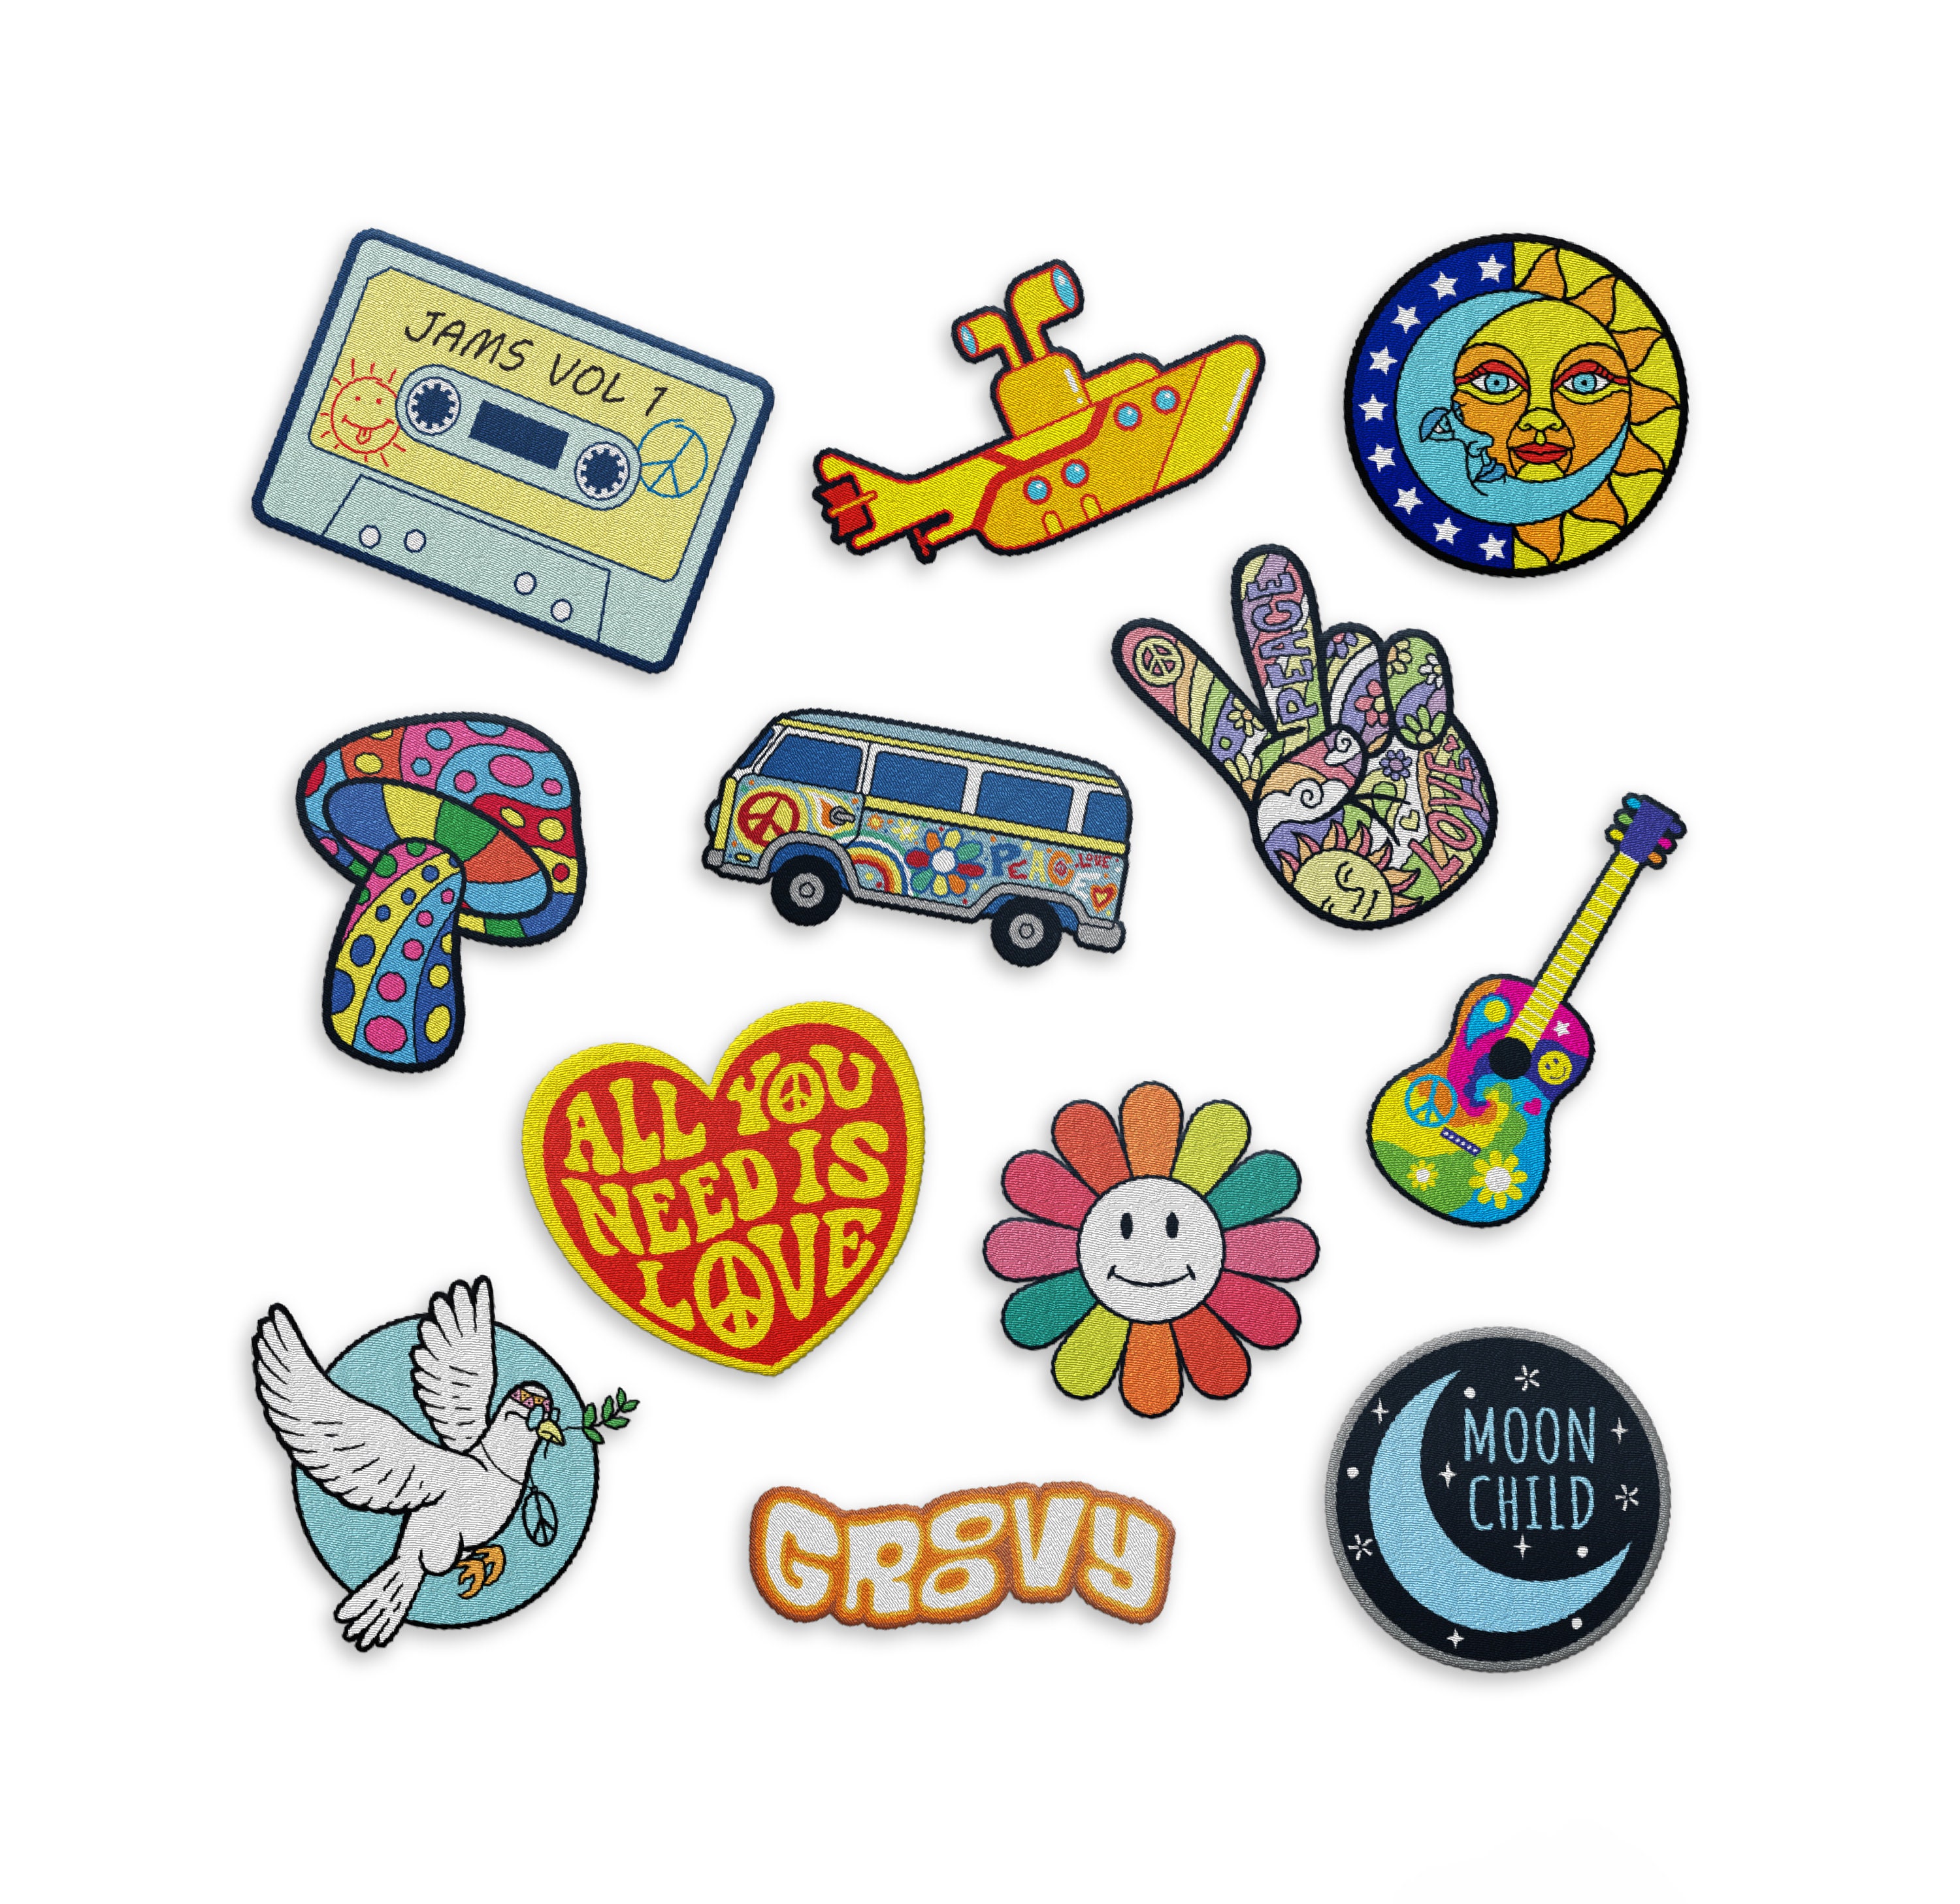 20 Cute Iron On Patches You Will Want To Put On Everything You Own - Pirl